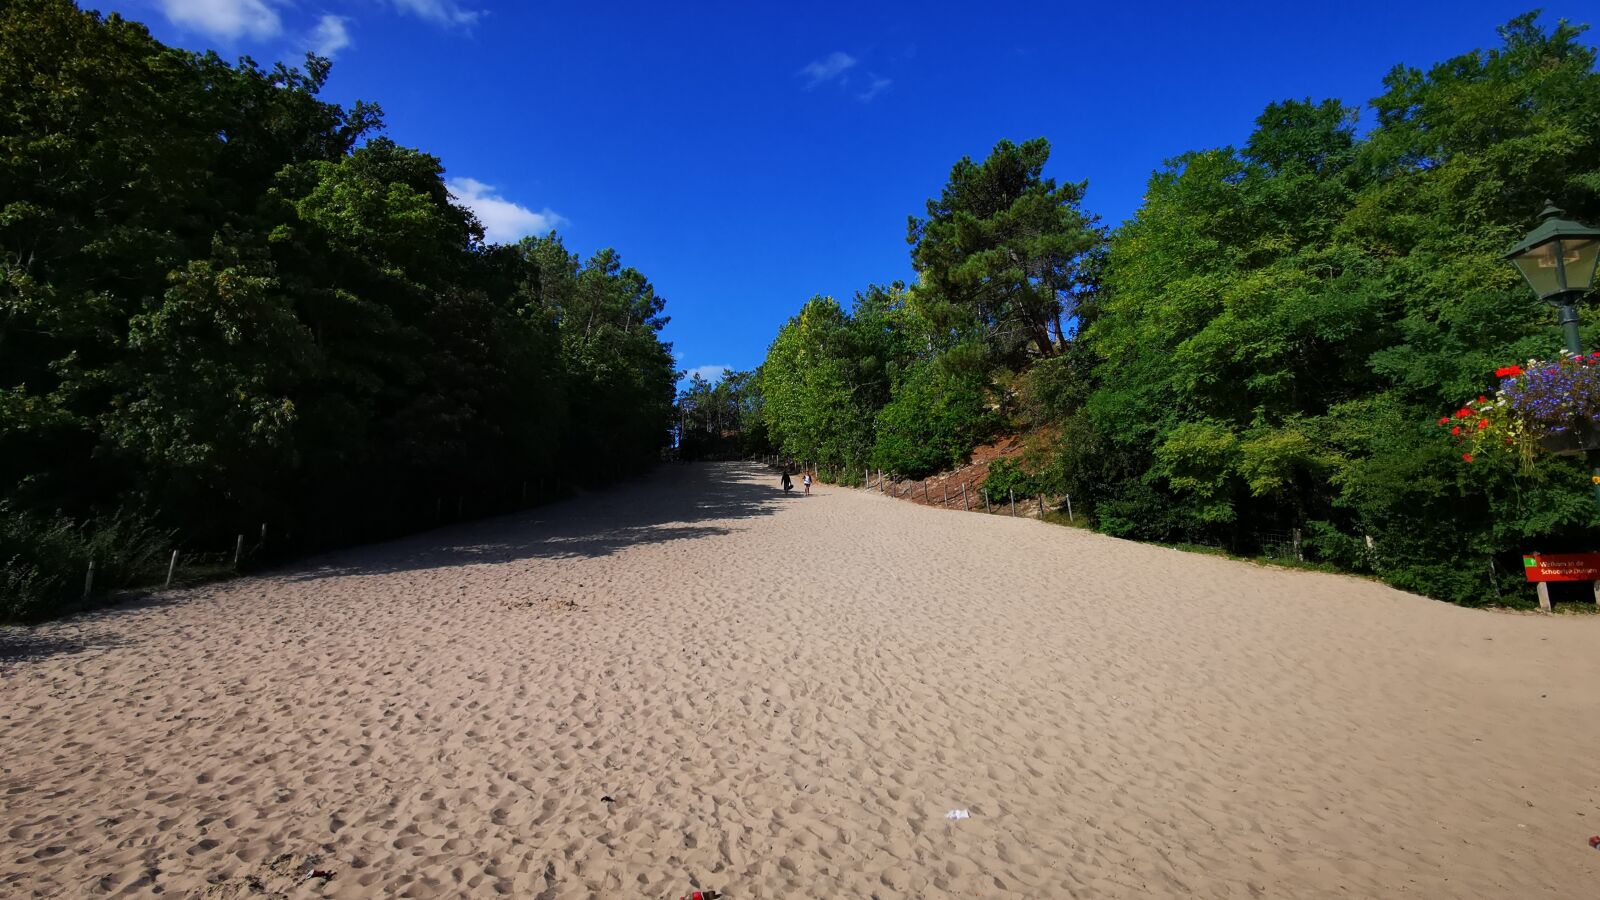 HUAWEI HMA-L29 sample photo. Beach access, mountains by photography